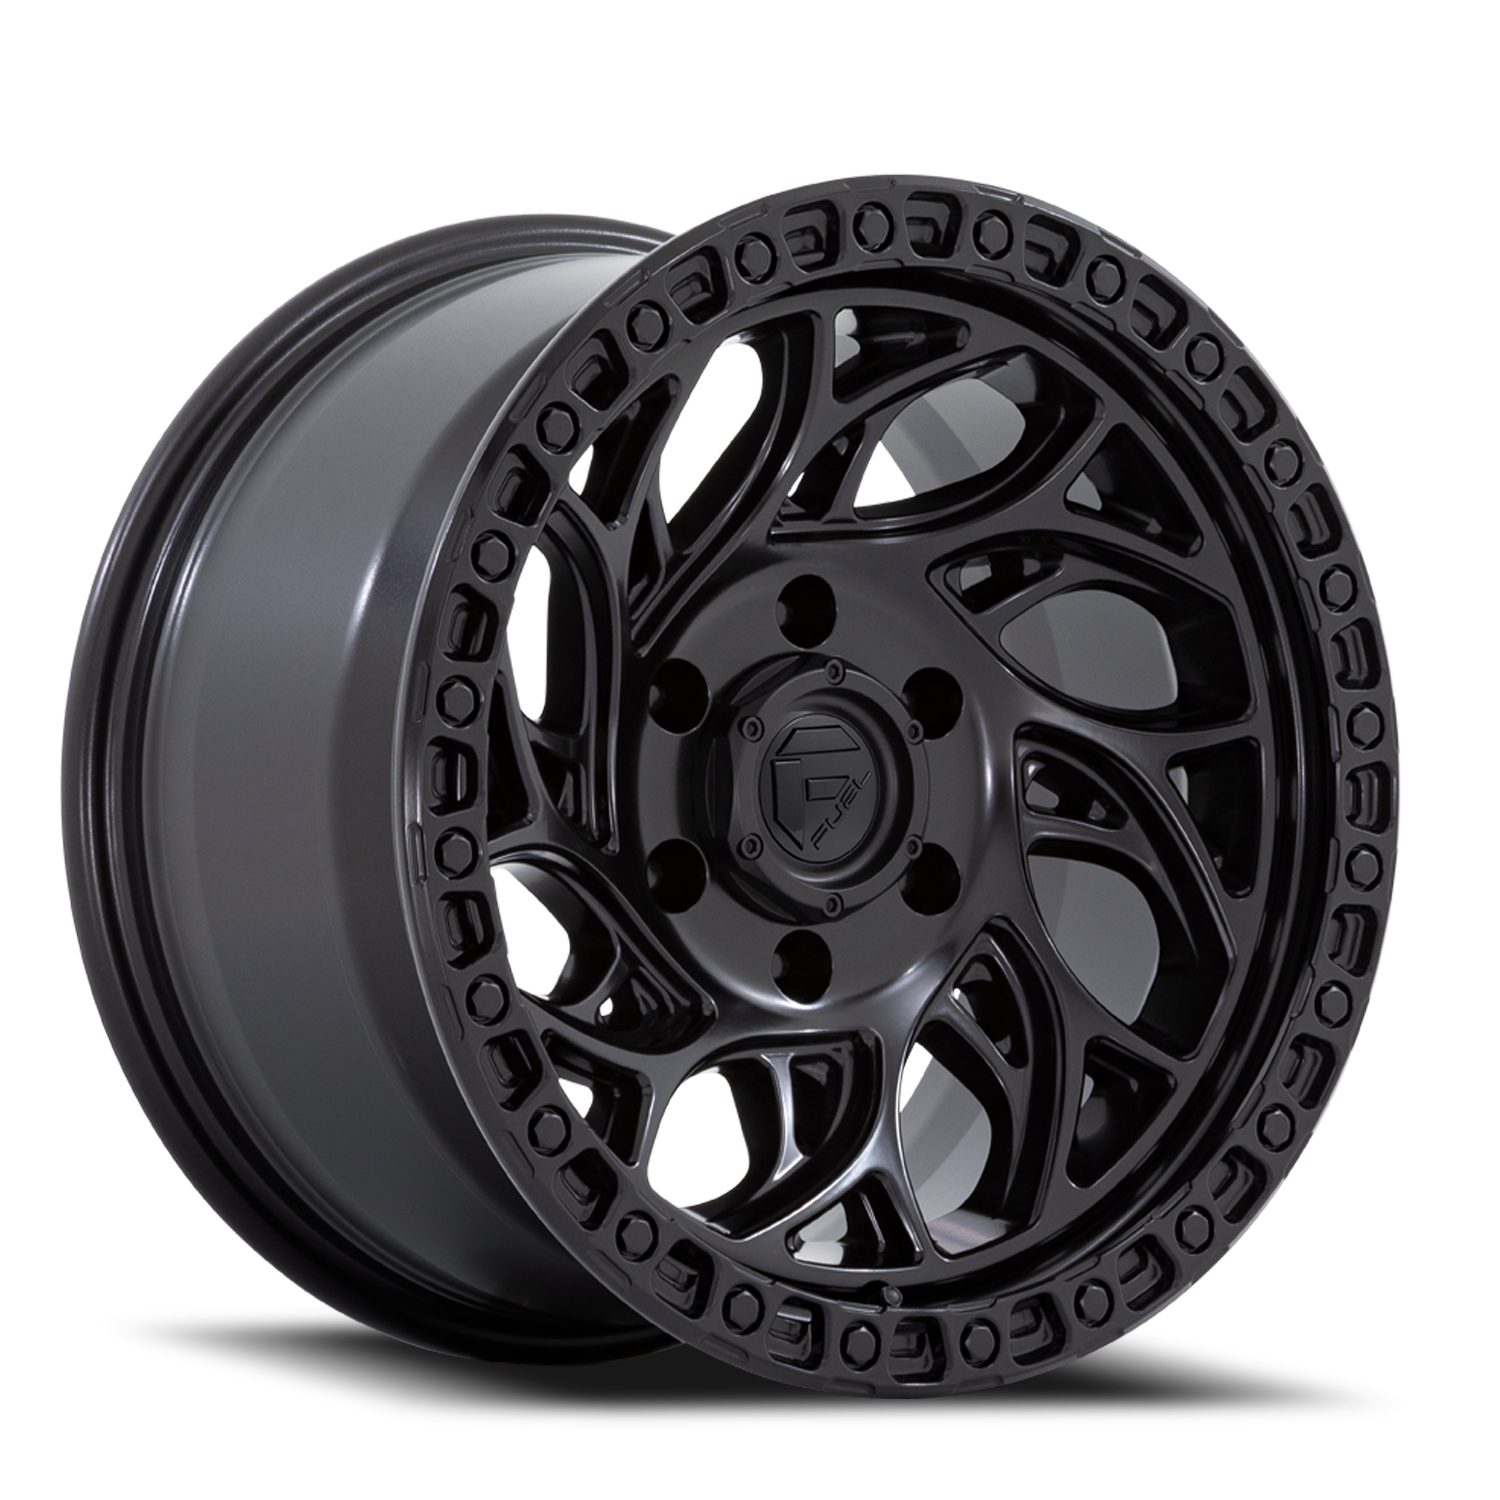 Aluminum Wheels 18X9 Runner OR D852 6 On 120 Blackout 67.06 Bore 1 Offset Fuel Off Road Wheels